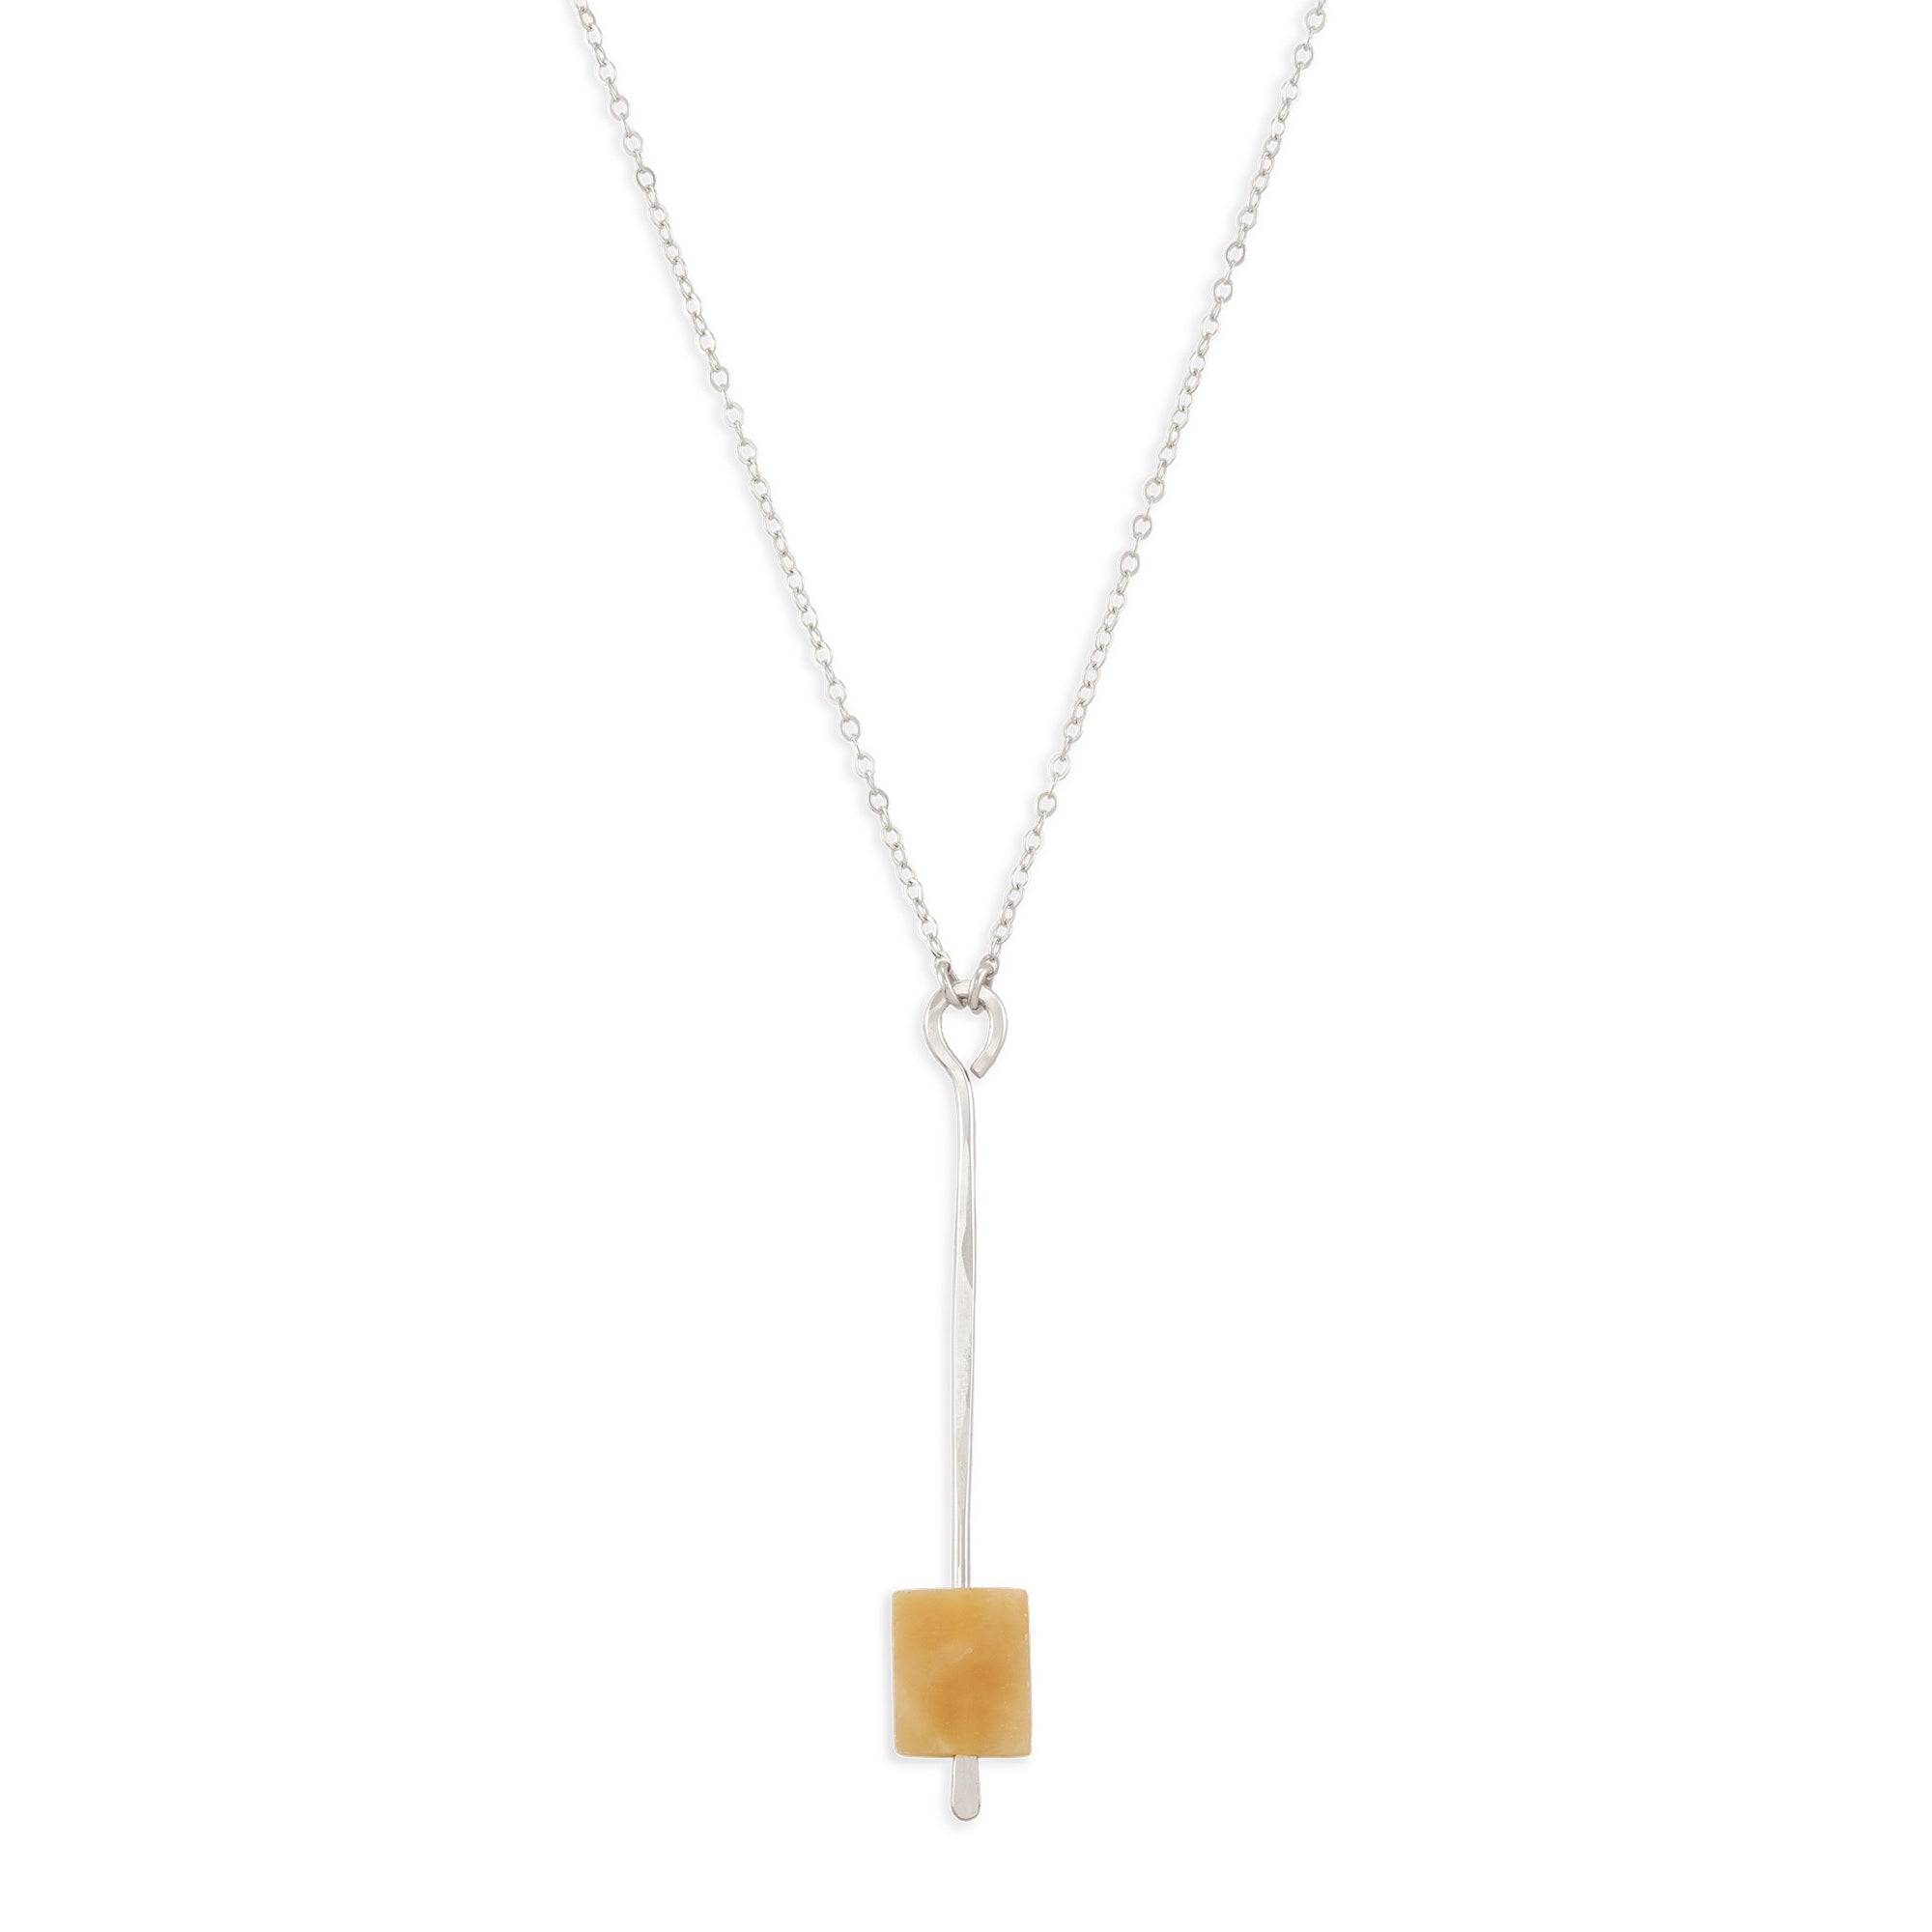 The Pendulum Necklace features frosted onyx suspended from a forged pendant in either sterling silver or 14k gold fill.